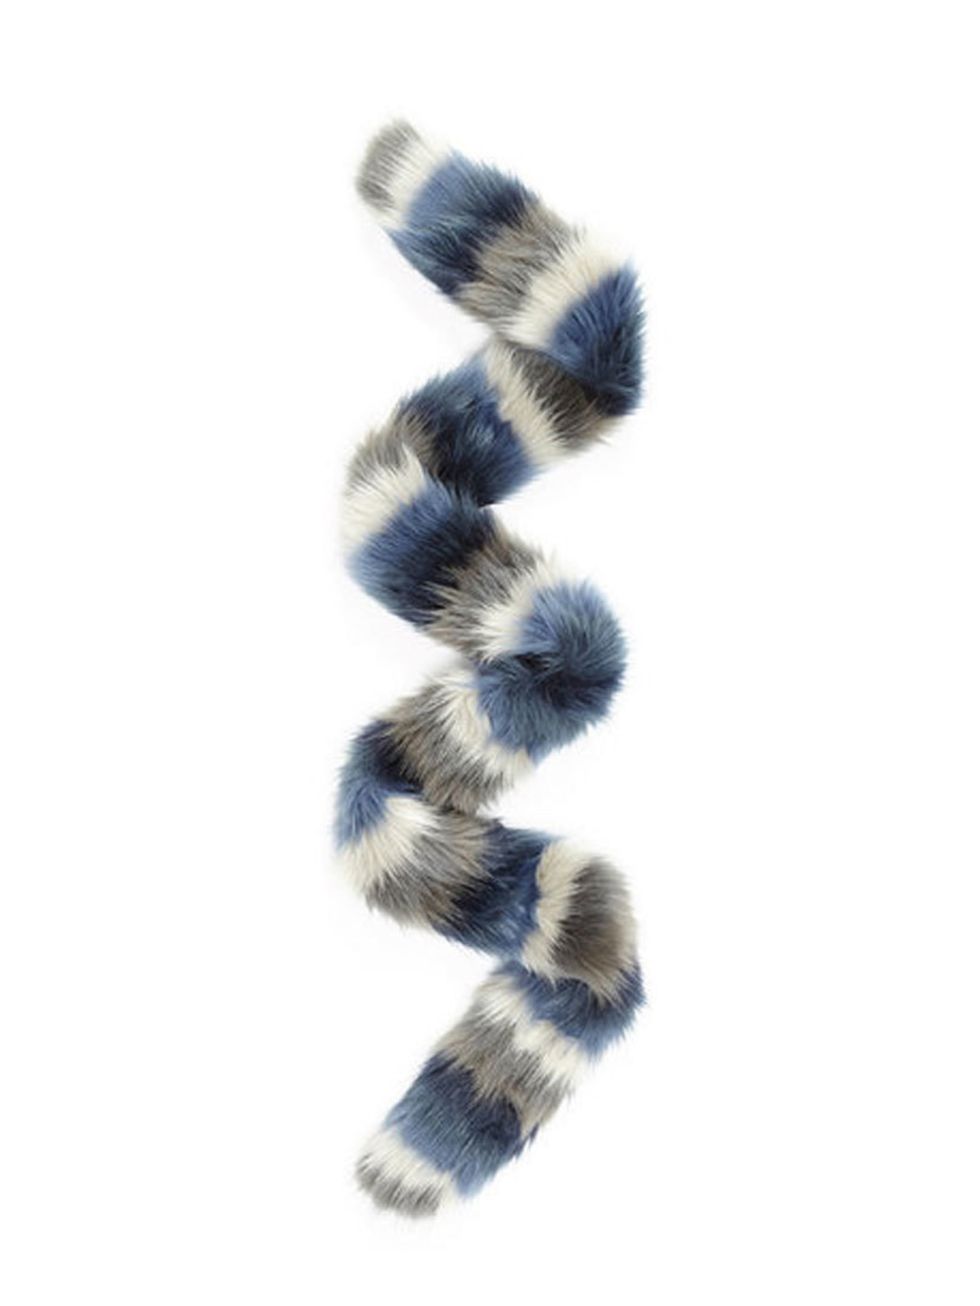 <p><strong>Faux Fur</strong></p>

<p>The brighter the better.</p>

<p><a href="http://www.charlottesimone.com/product/grey-blue-white-stole/">Charlotte Simone</a> £100</p>

<p> </p>